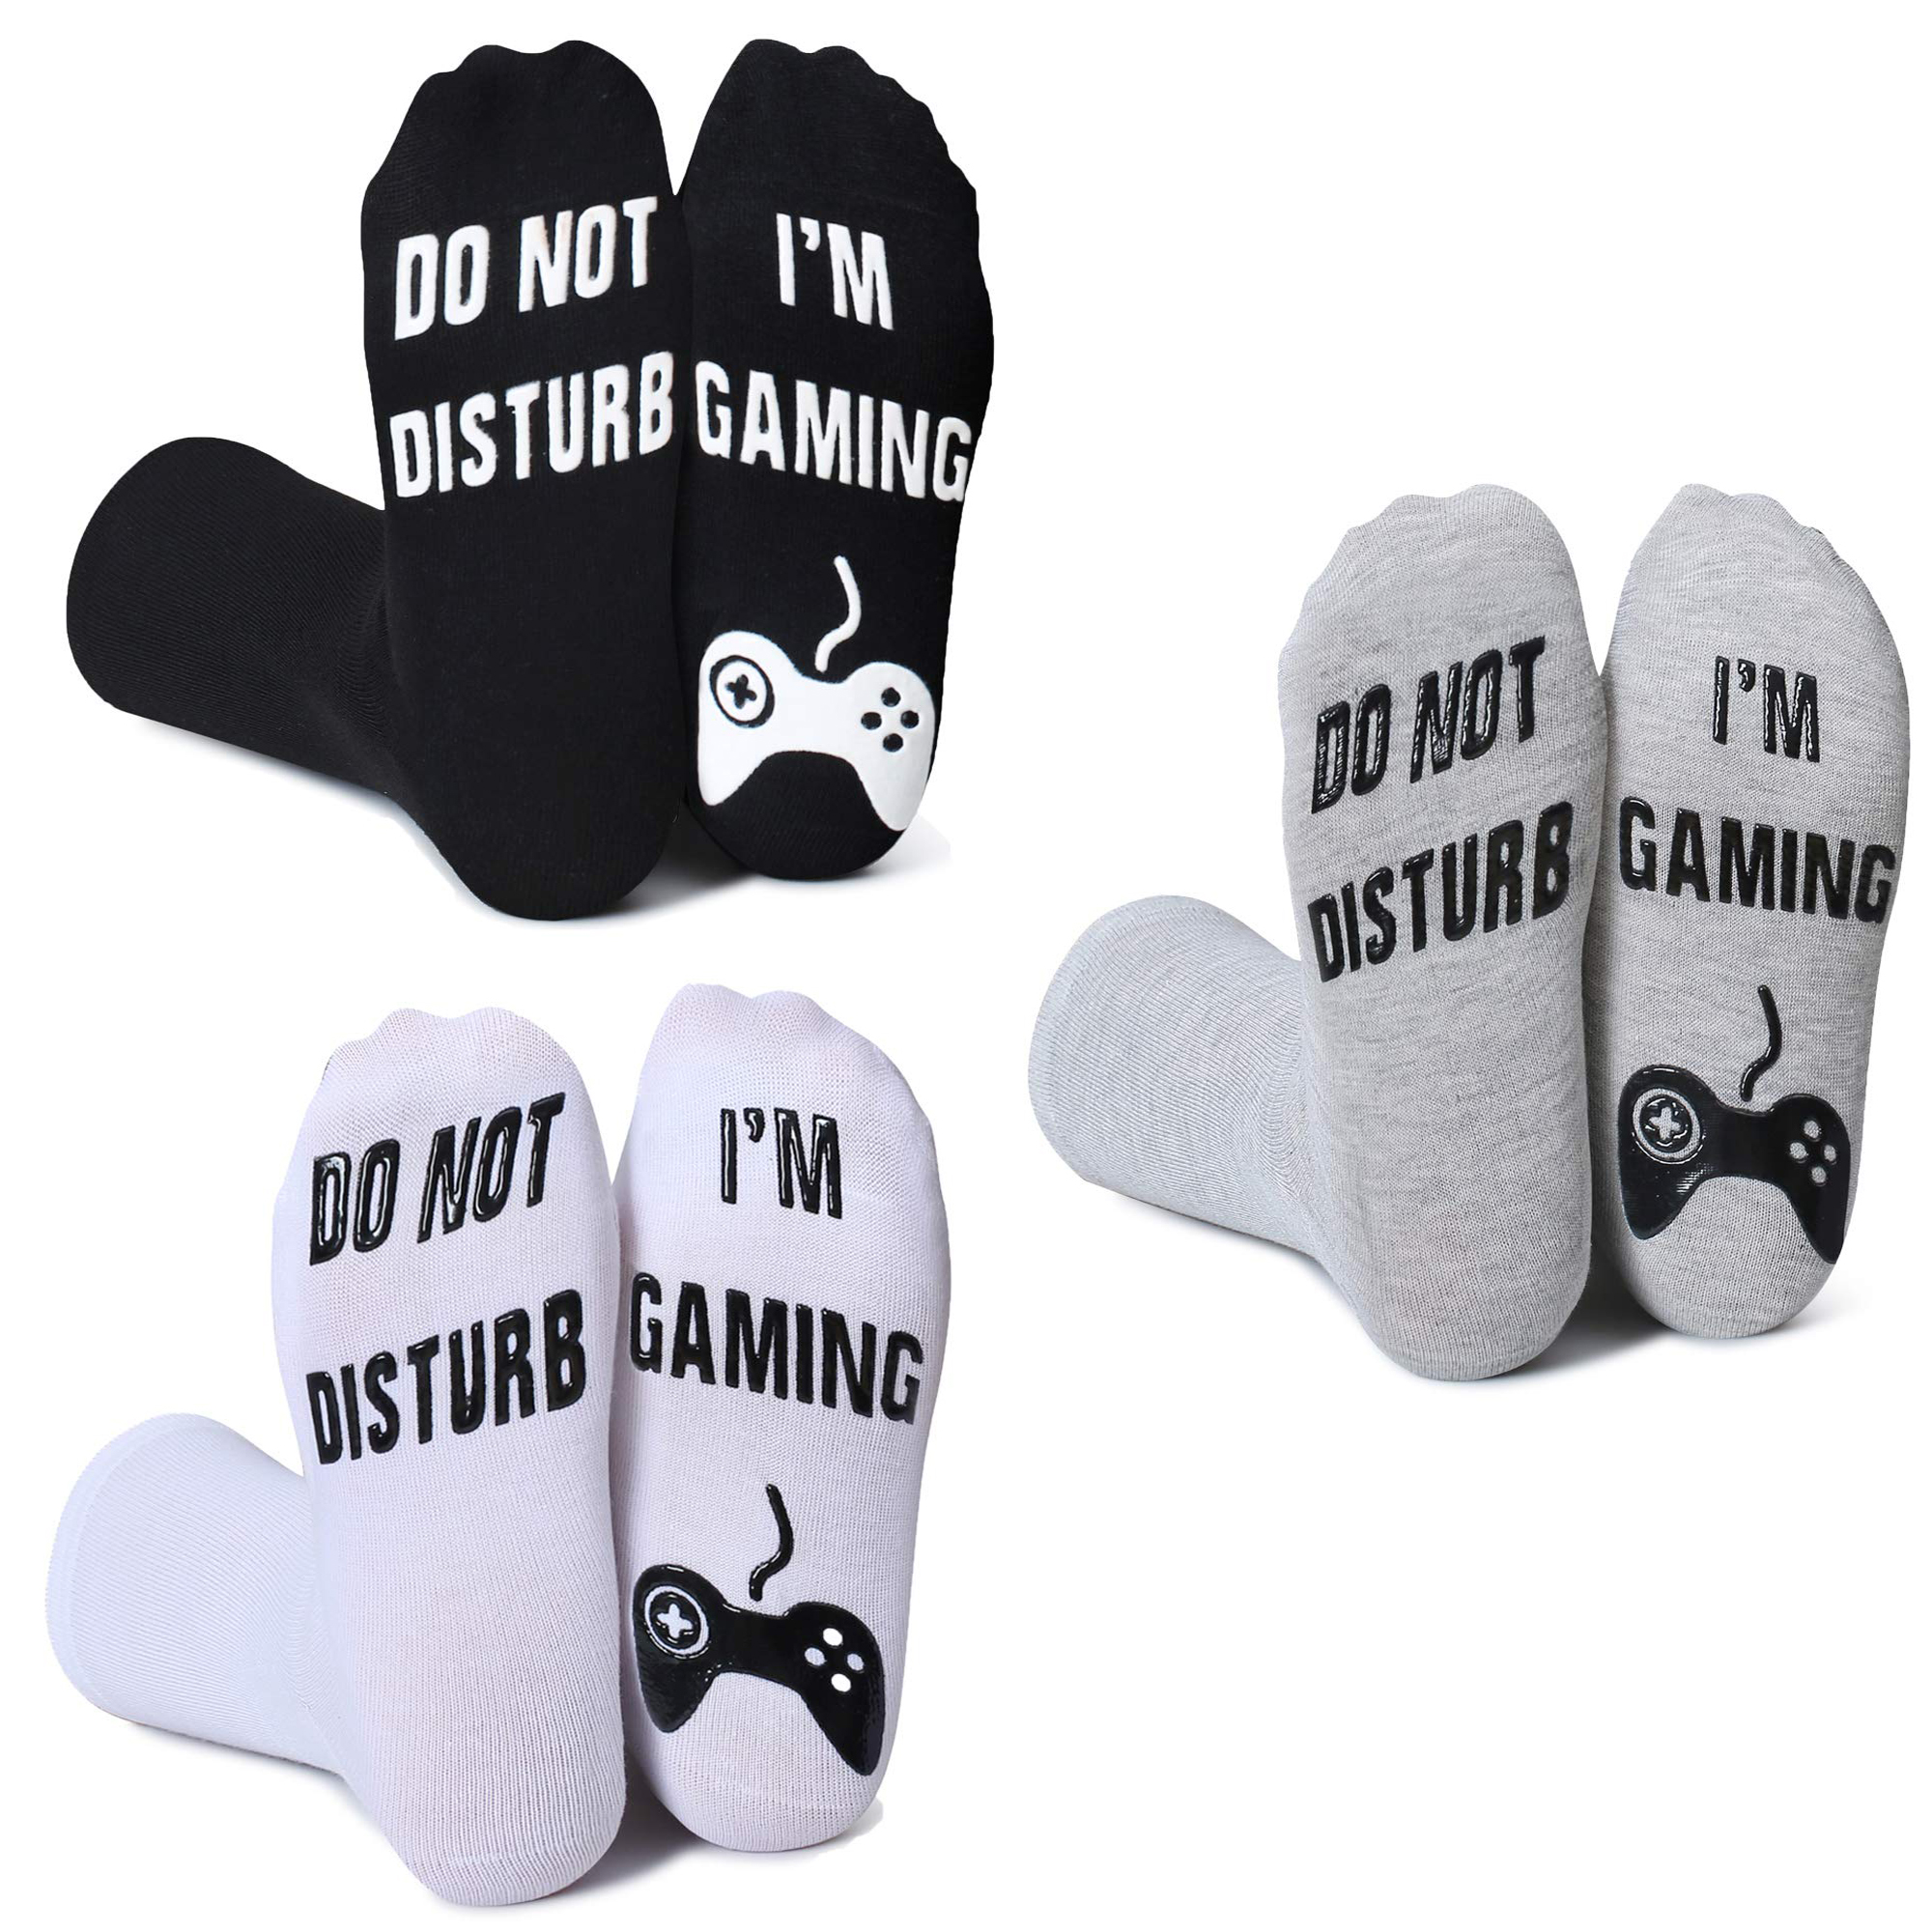 Do Not Disturb I'm Gaming Socks Cotton Novelty Funny for Gamer 3 Pairs